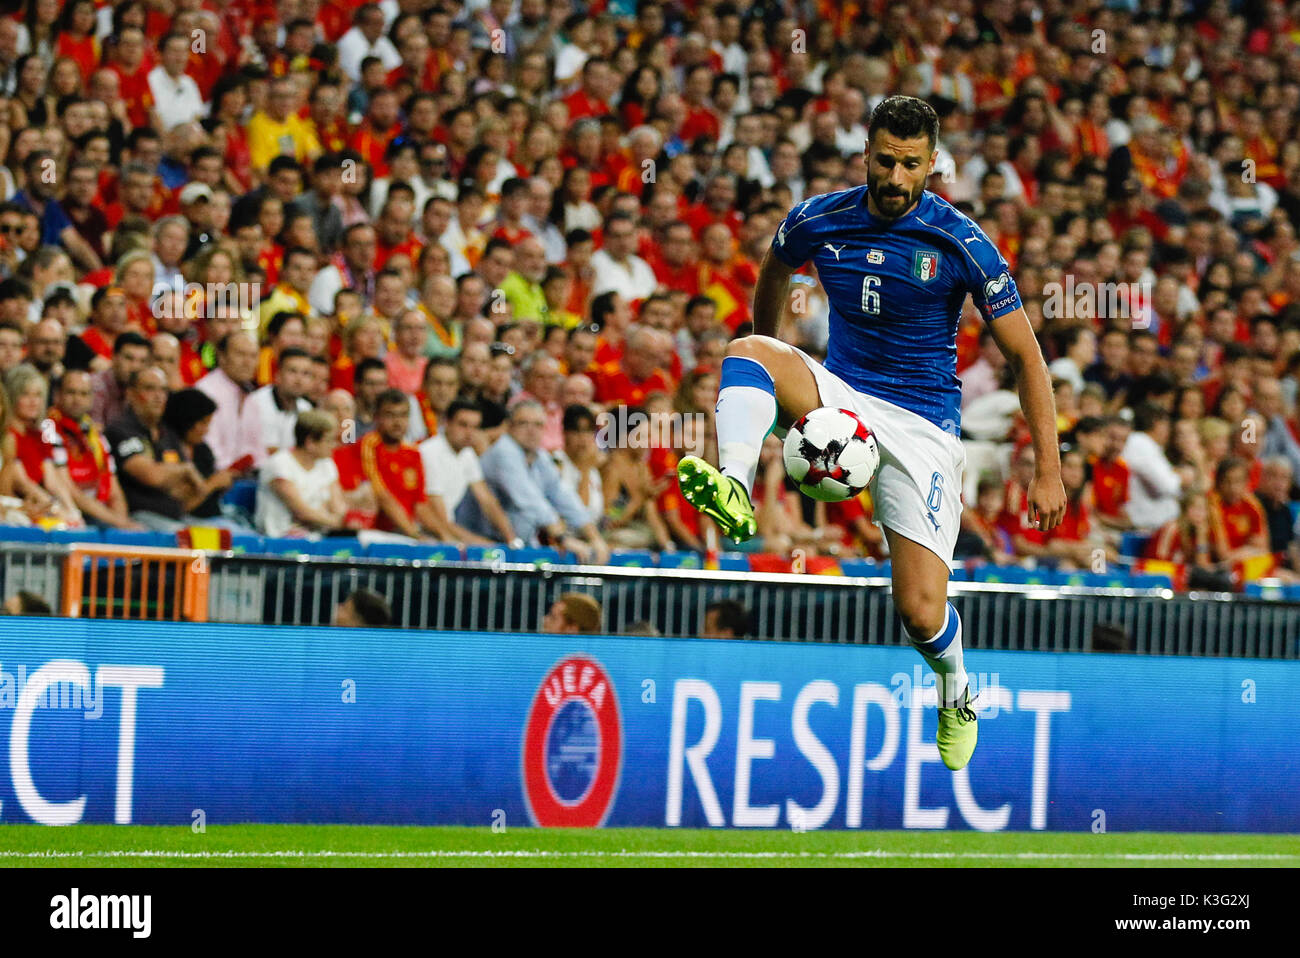 Antonio Candreva (6) Italian player.  In action during the qualifying match for the 2018 World Cup, Round 7, between Spain vs Italy at the Santiago Bernabeu stadium in Madrid, Spain, September 2, 2017 . Stock Photo